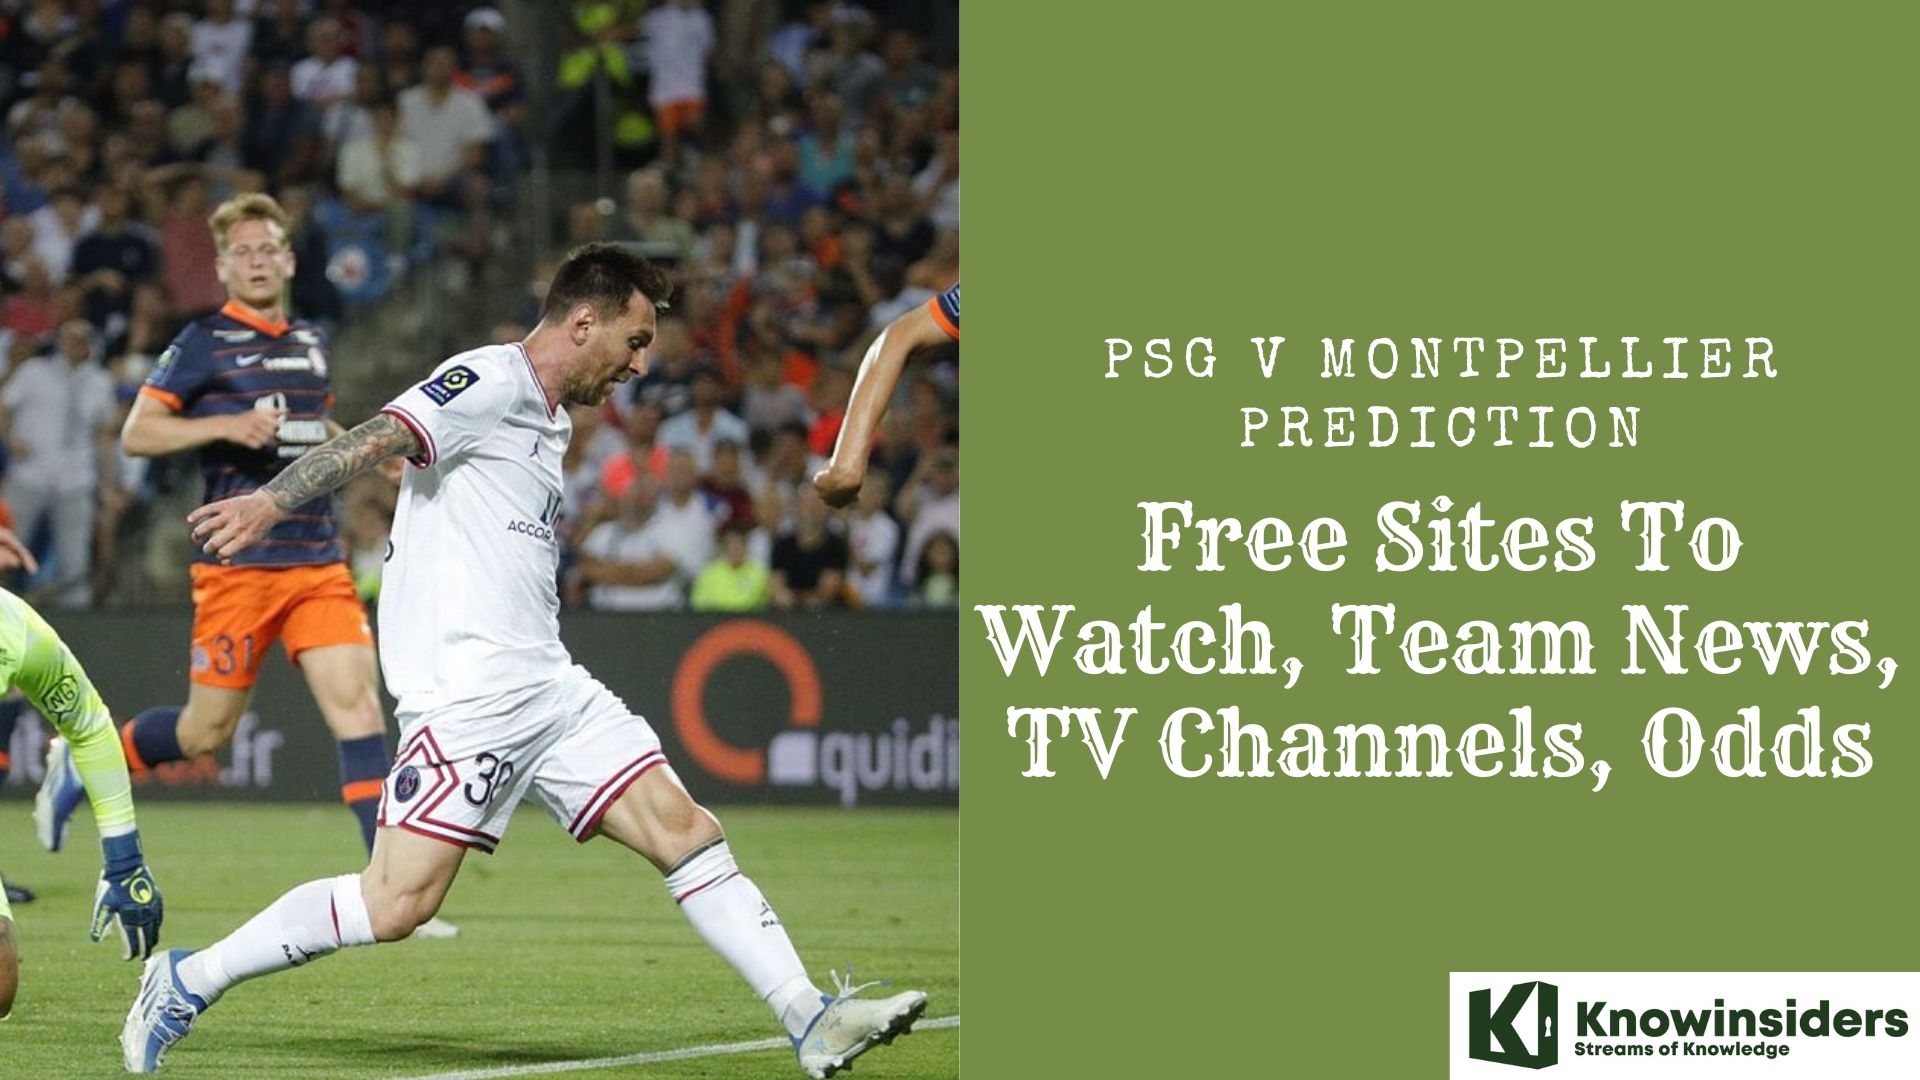 PSG v Montpellier Prediction: Free Sites To Watch, Team News, TV Channels, Odds Knowinsiders.com